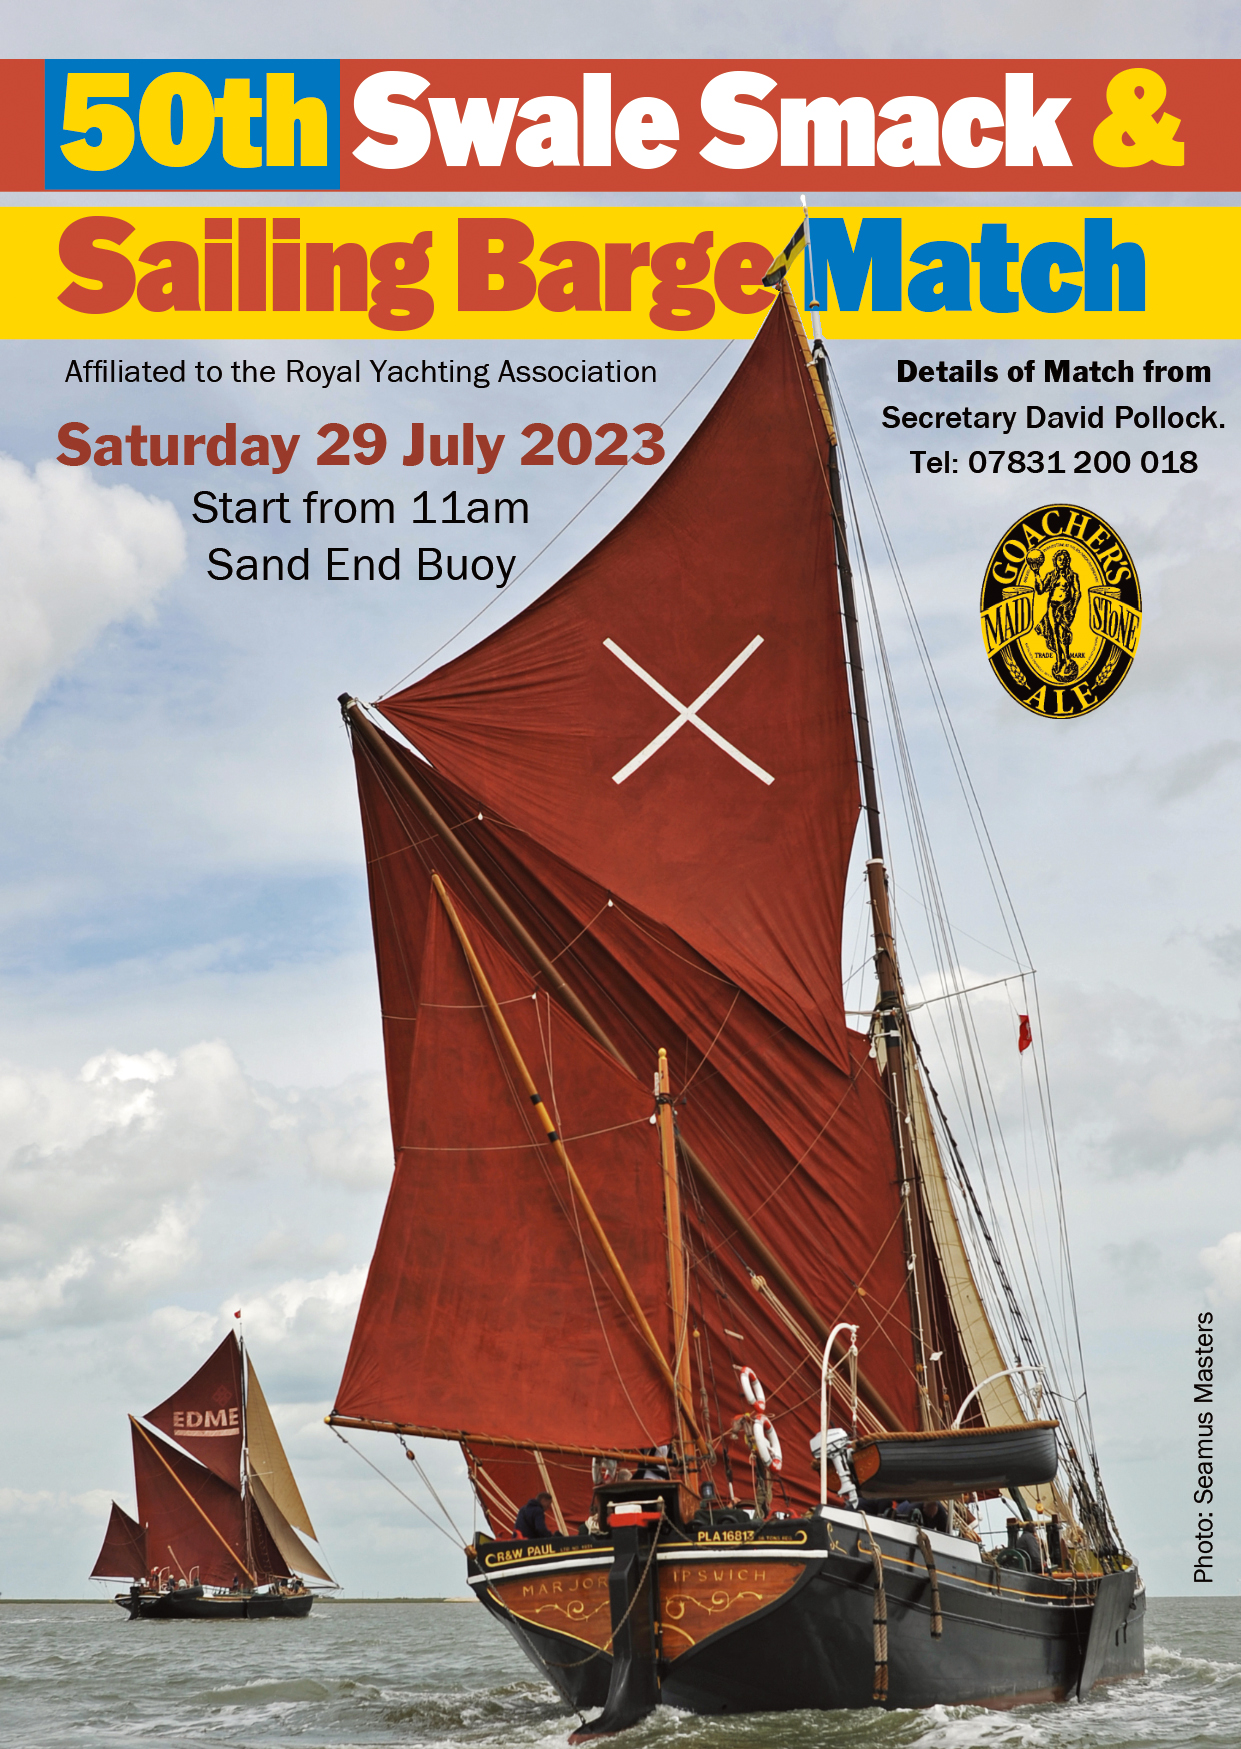 Swale Smack & Barge Match, 29 July 2023 Medway and Swale Boating